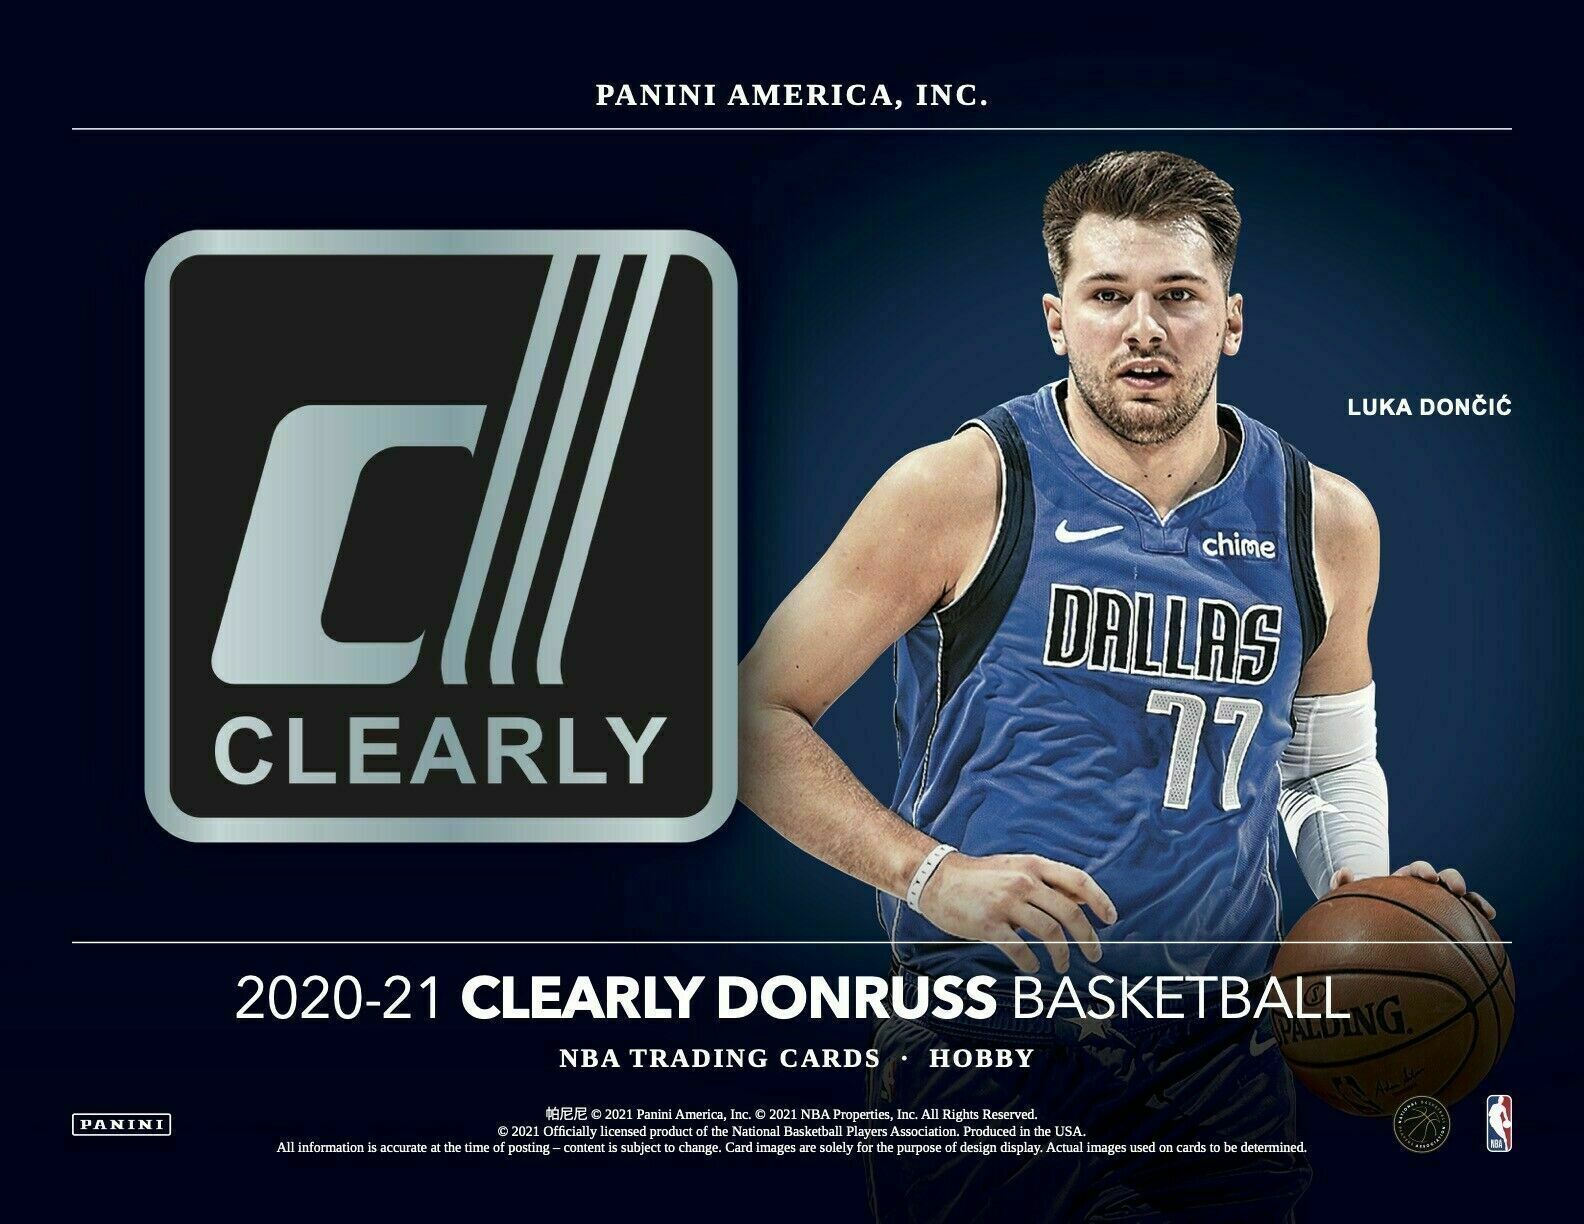 LOS ANGELES CLIPPERS 2020-21 PANINI CLEARLY DONRUSS Half CASE 6 BOX TEAM BREAK 1